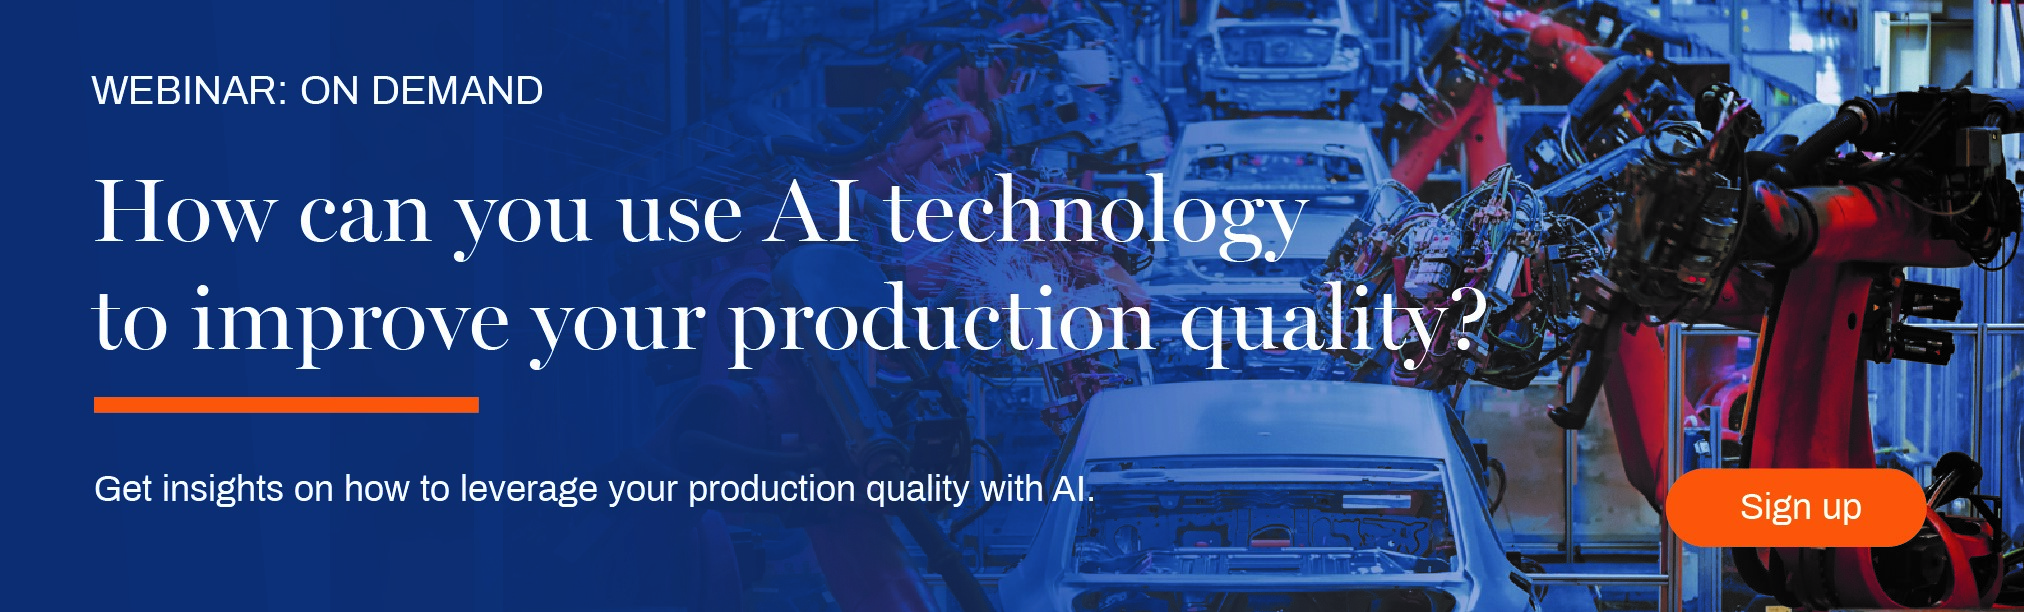 Banner for on-demand webinar about AI and production quality